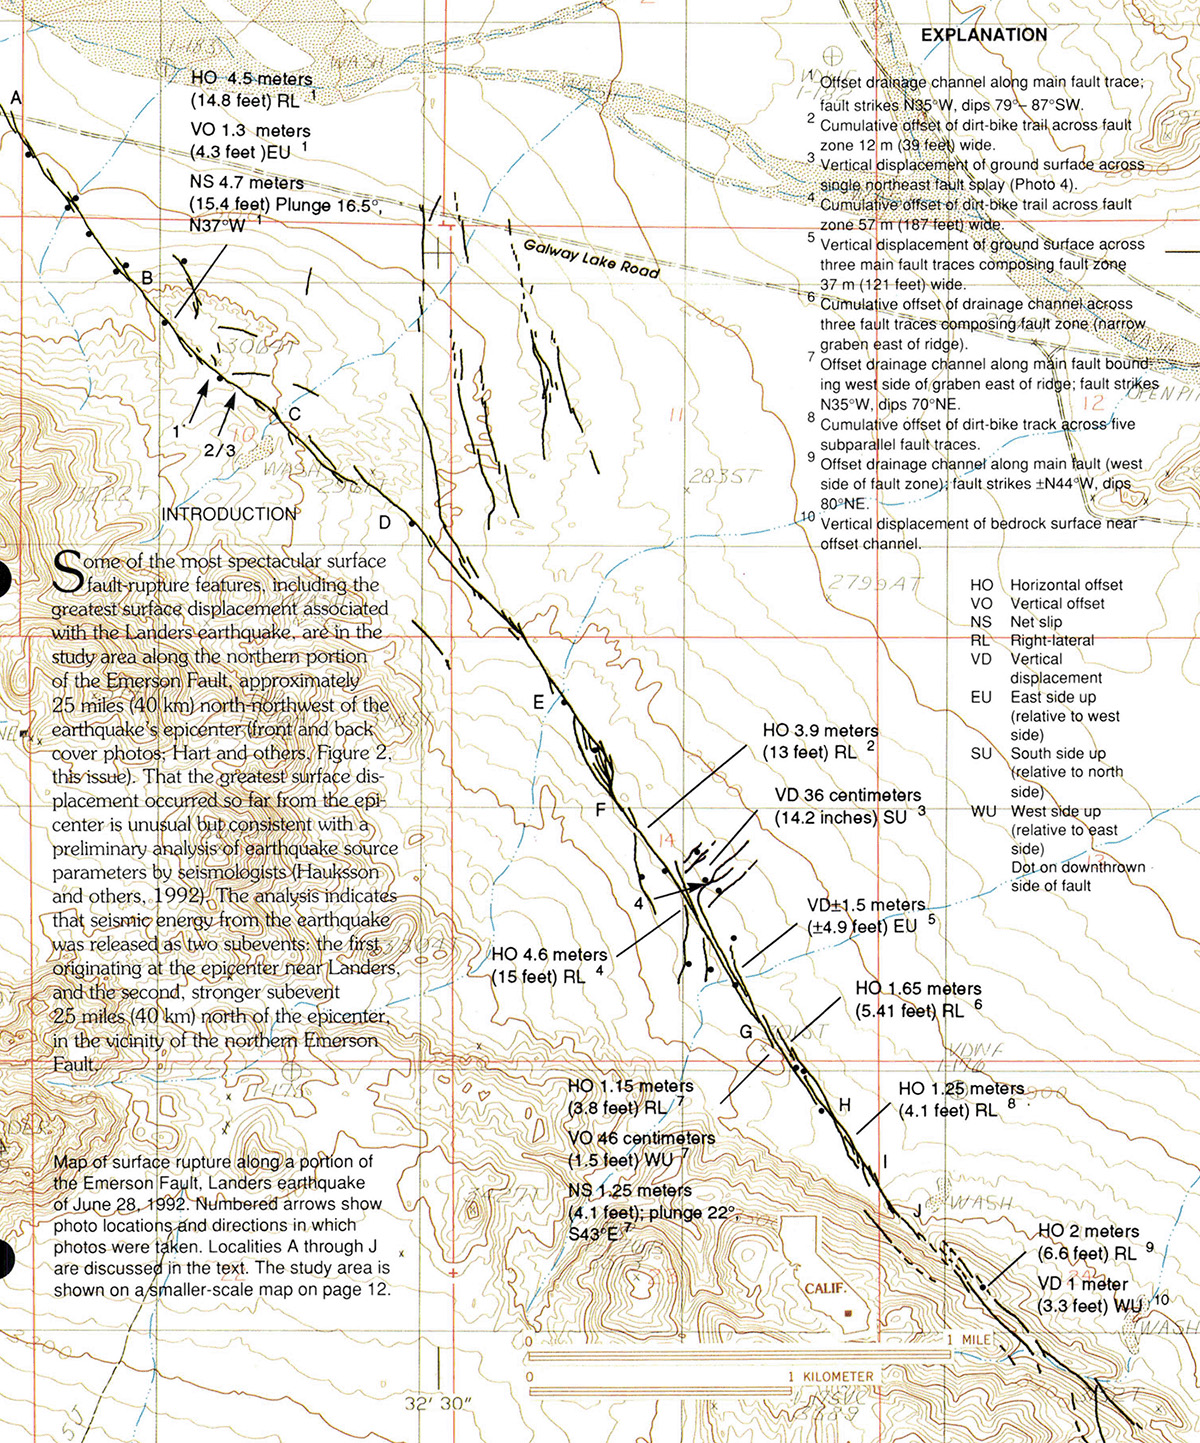 Map of surface rupture along a portion of the Emerson Fault.